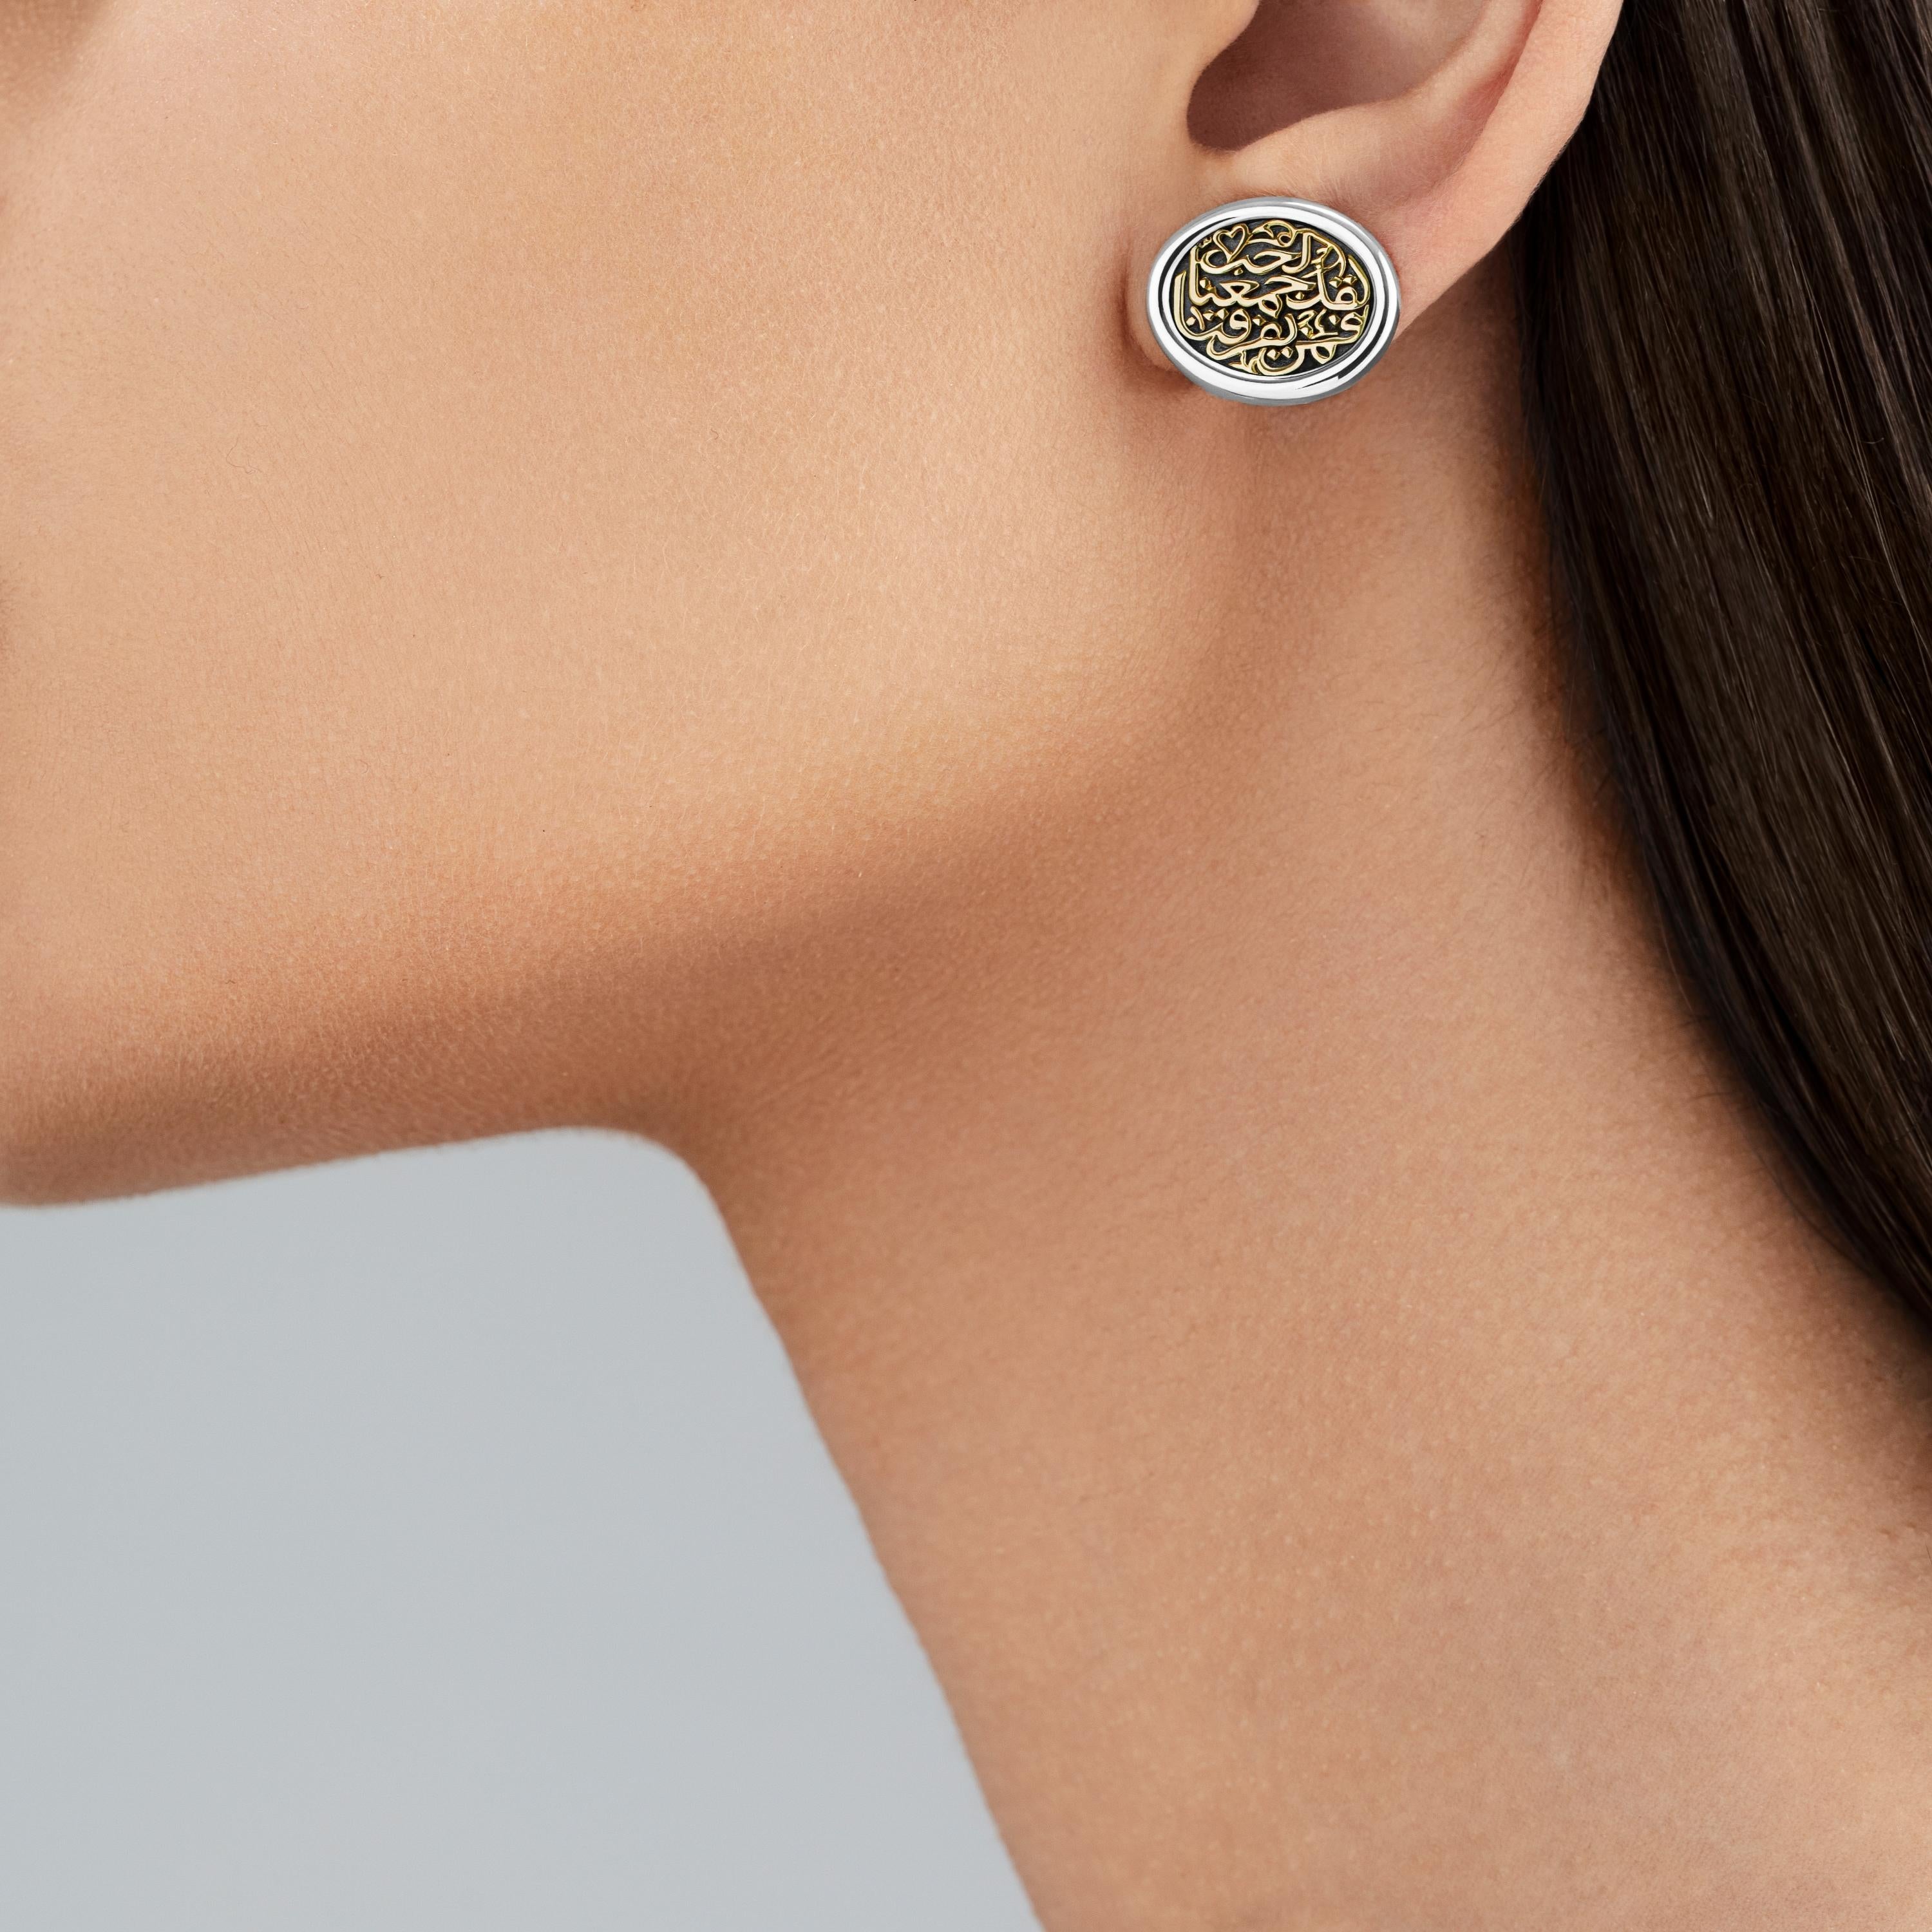 18 Karat Gold and Sterling Silver Classic Calligraphy Button Earrings. 

Timeless Button Earrings adorned with the words of Gibran Khalil Gibran - 'لقد جمعنا الحب فمن يفرقنا' , which translates to 